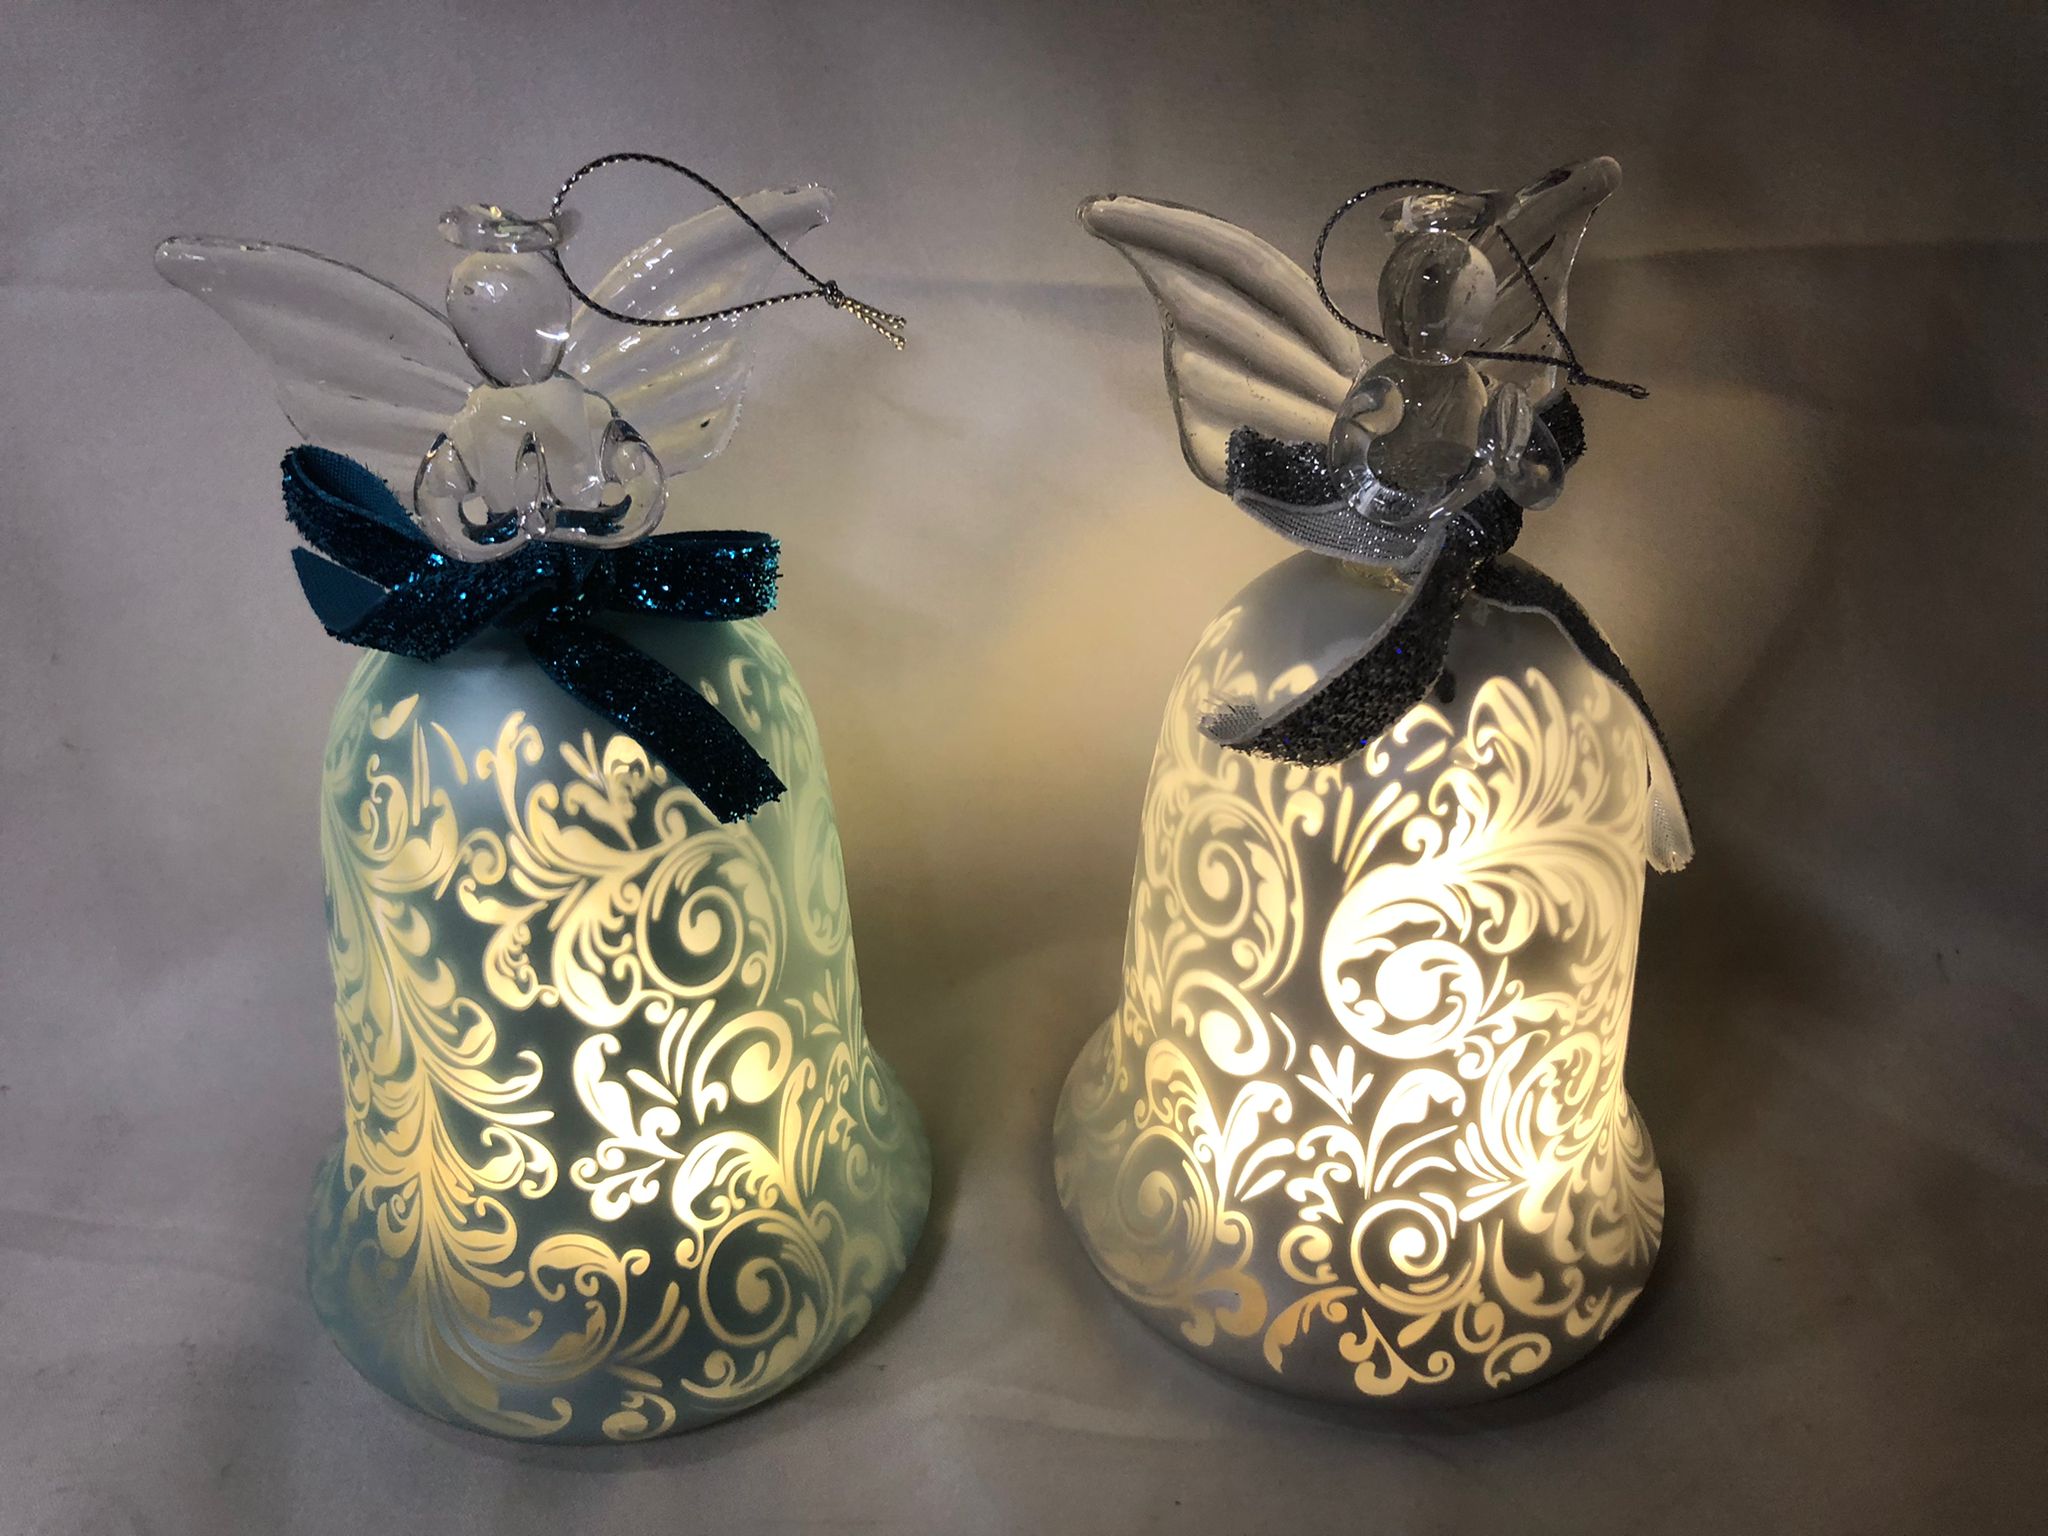 Set of 2 Illuminated 6" Angel Bells with Gift Bags by Valerie